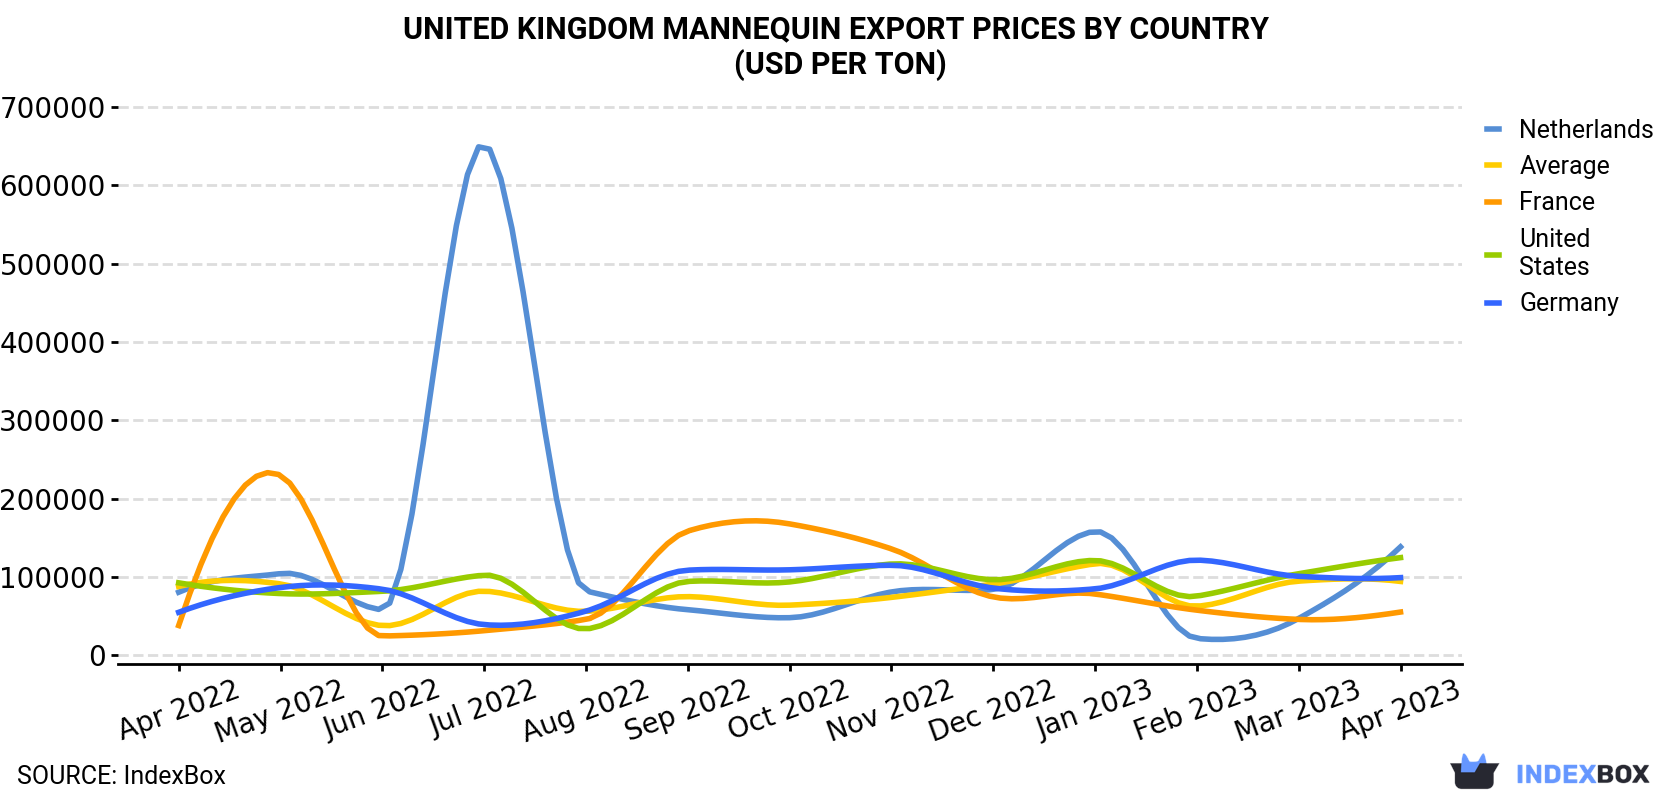 United Kingdom Mannequin Export Prices By Country (USD Per Ton)